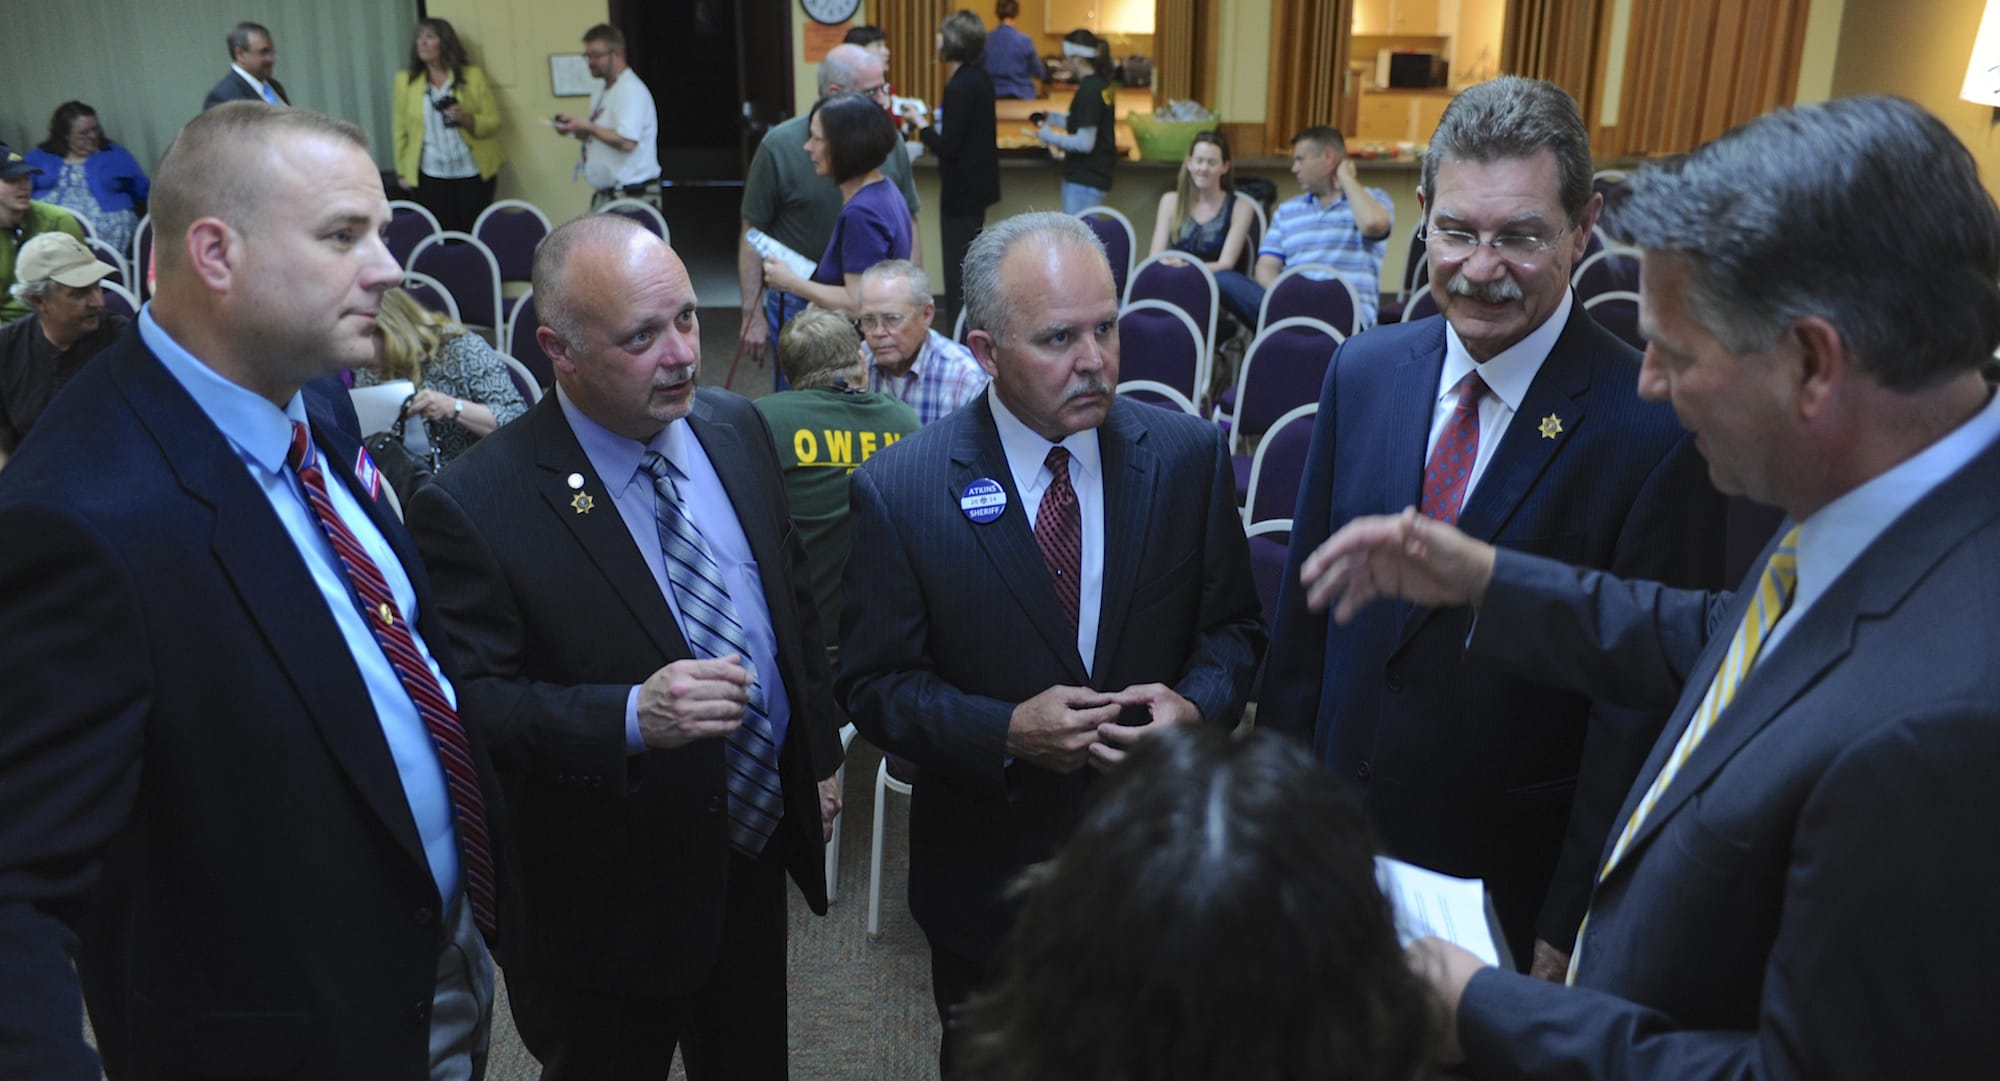 Sheriff candidates Shane Gardner, from left, Ed Owens, Chuck Atkins and John Graser go over the speaking rules prior to a forum Thursday in Vancouver.